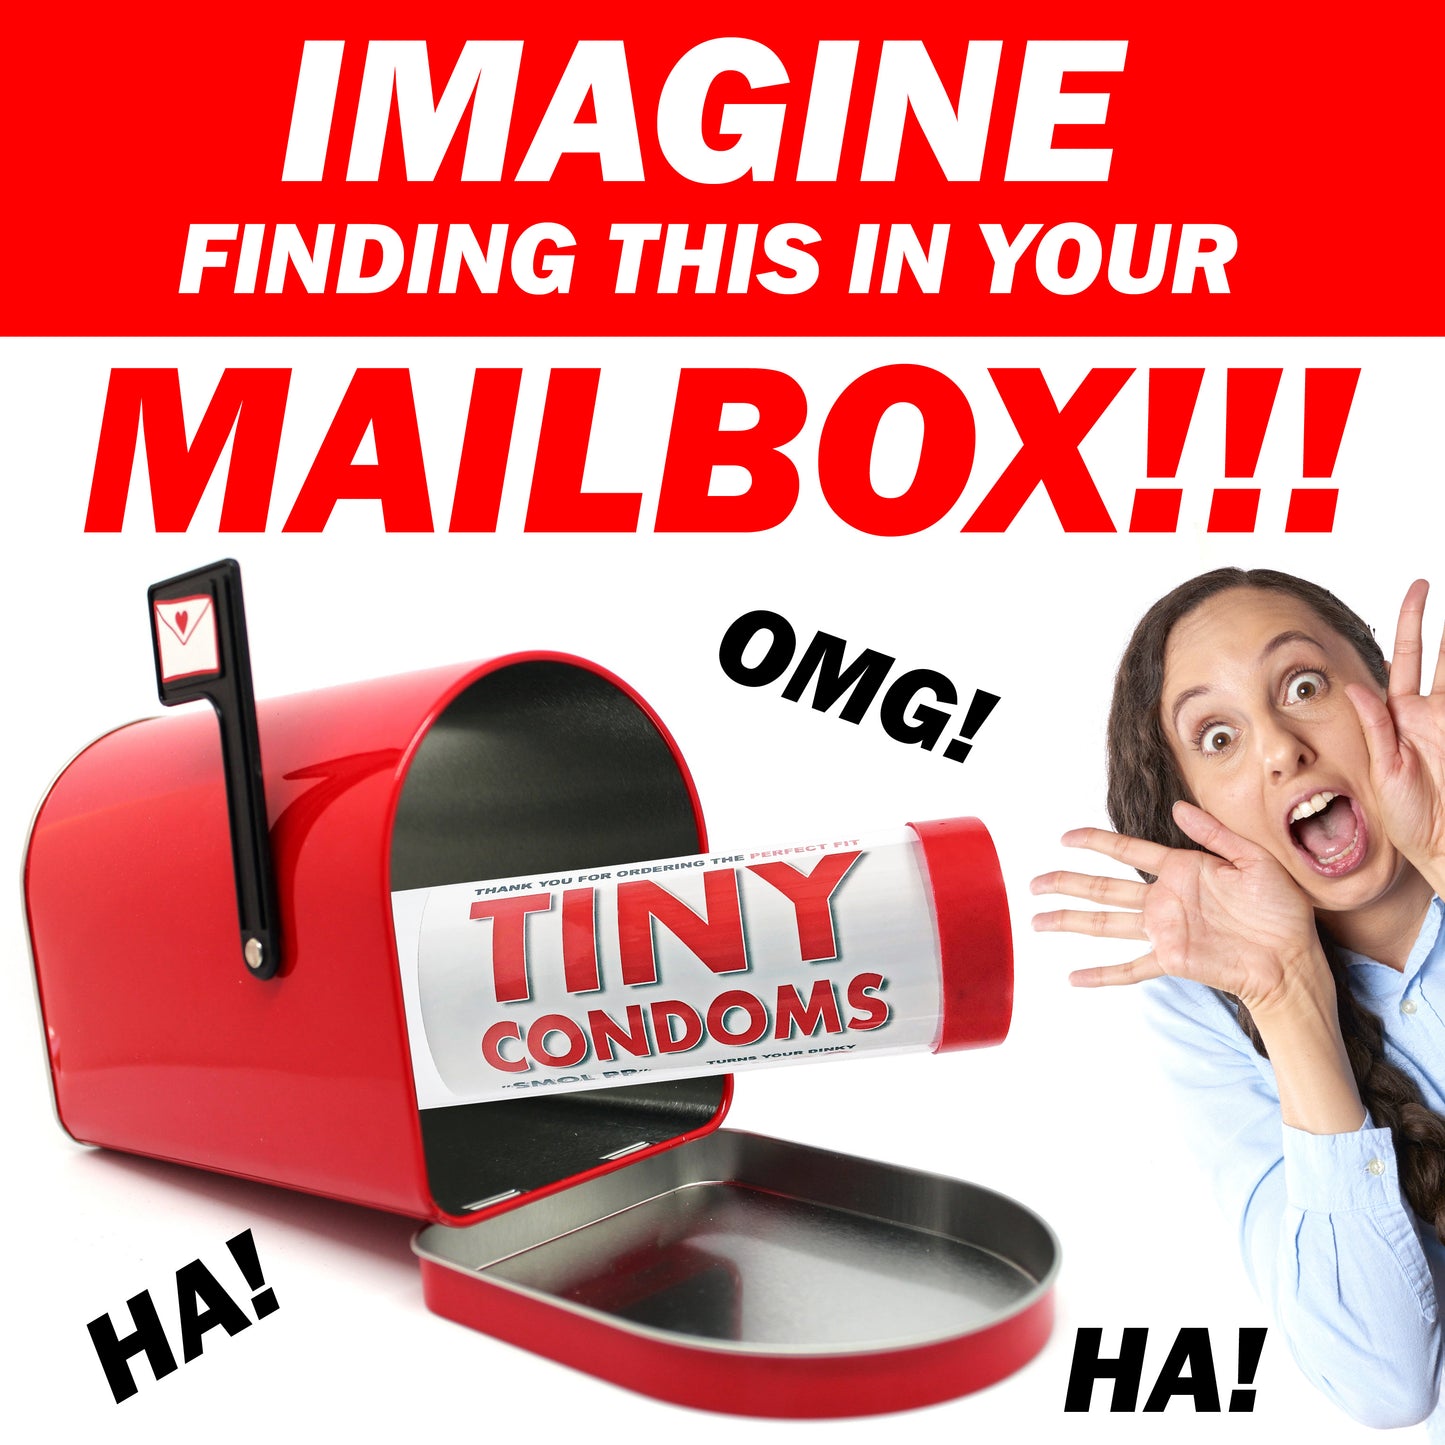 Tiny Condoms embarrassing clear prank tube gets mailed directly to your victims 100% anonymously!